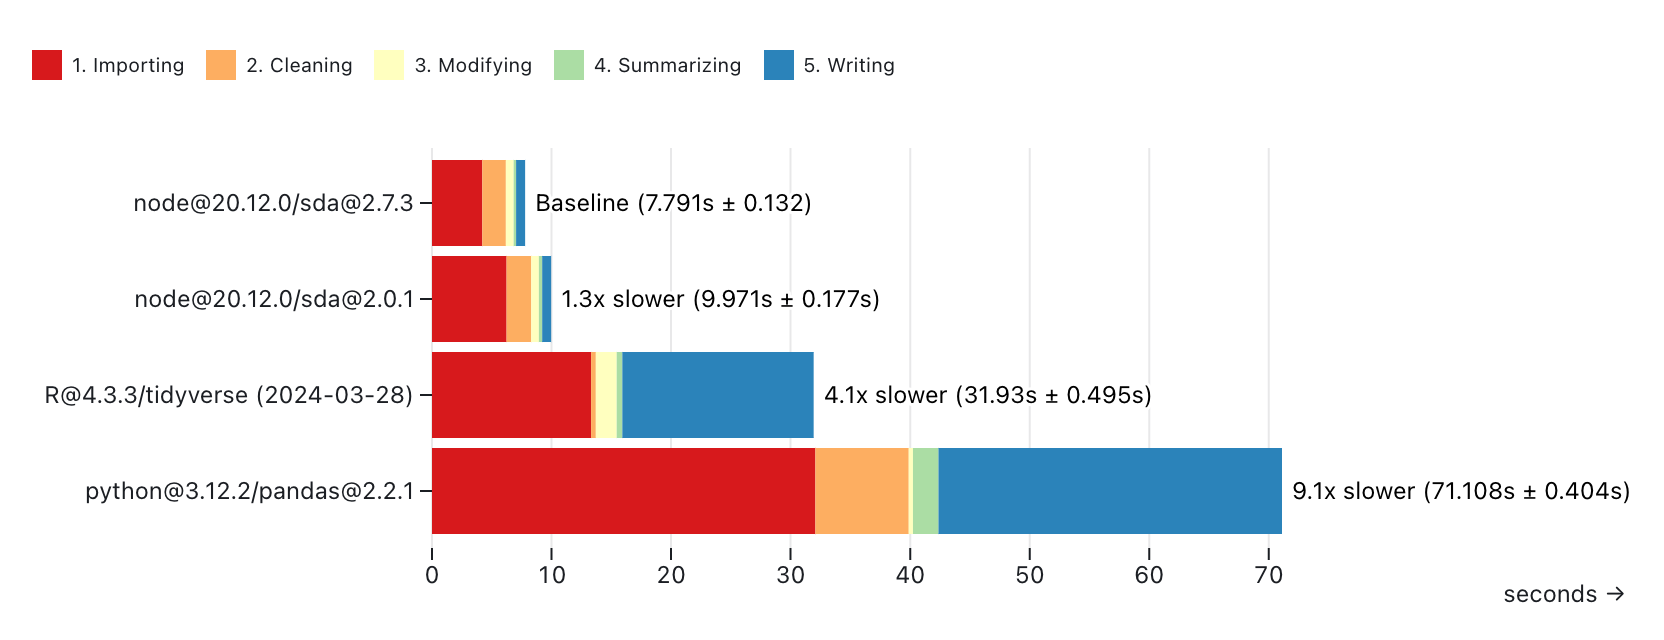 A chart showing the processing duration of multiple scripts in various languages